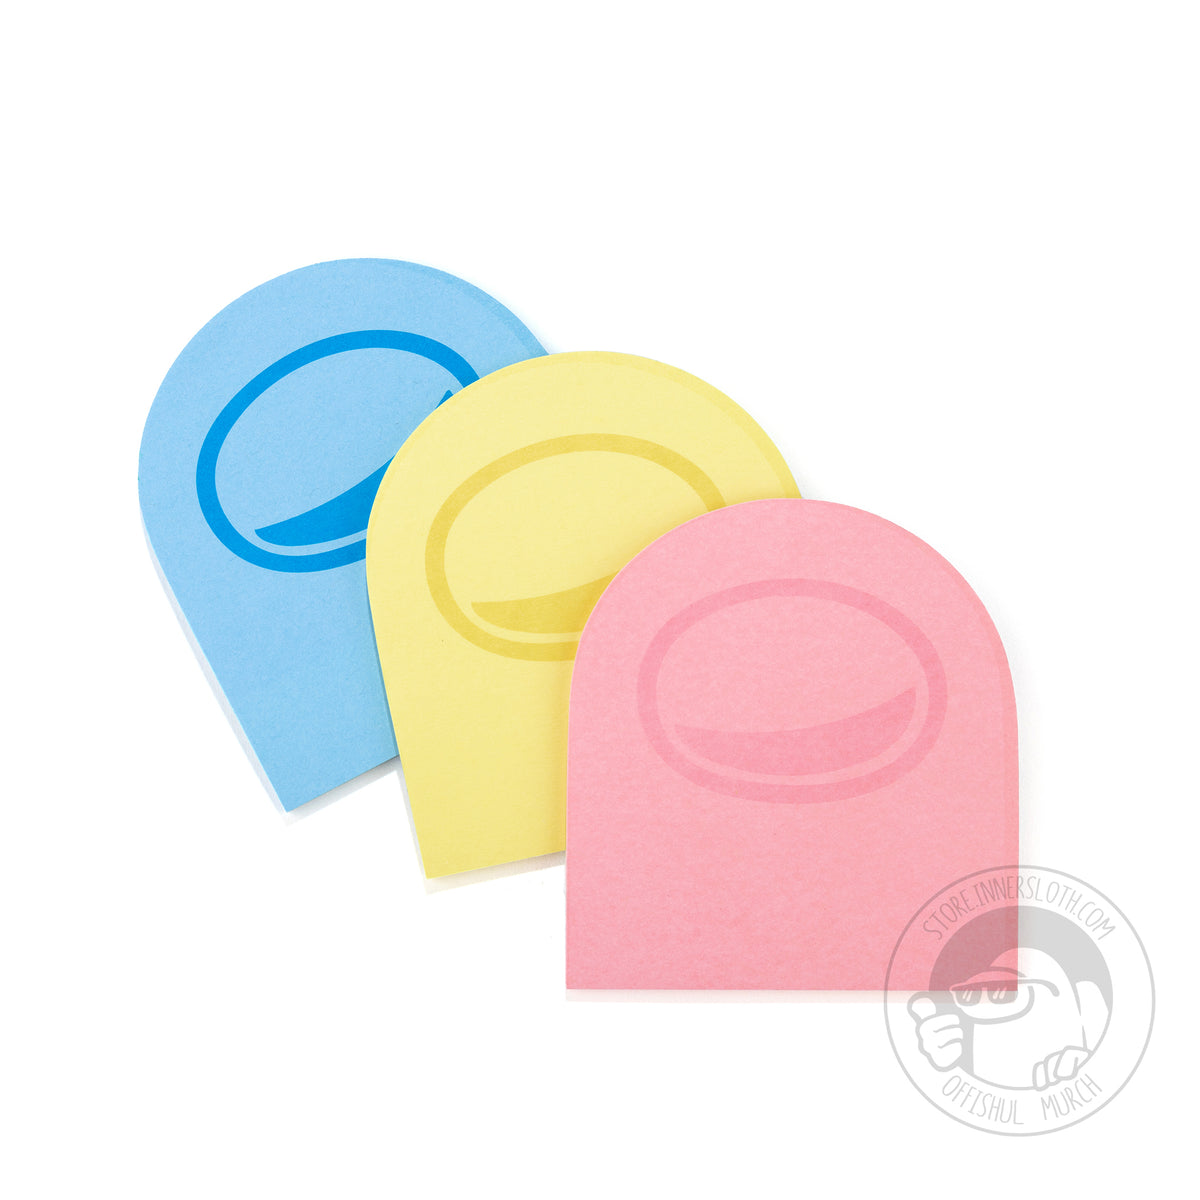 A product photo of each color pack of Post-It notes - blue, yellow, and pink - laying atop one another.